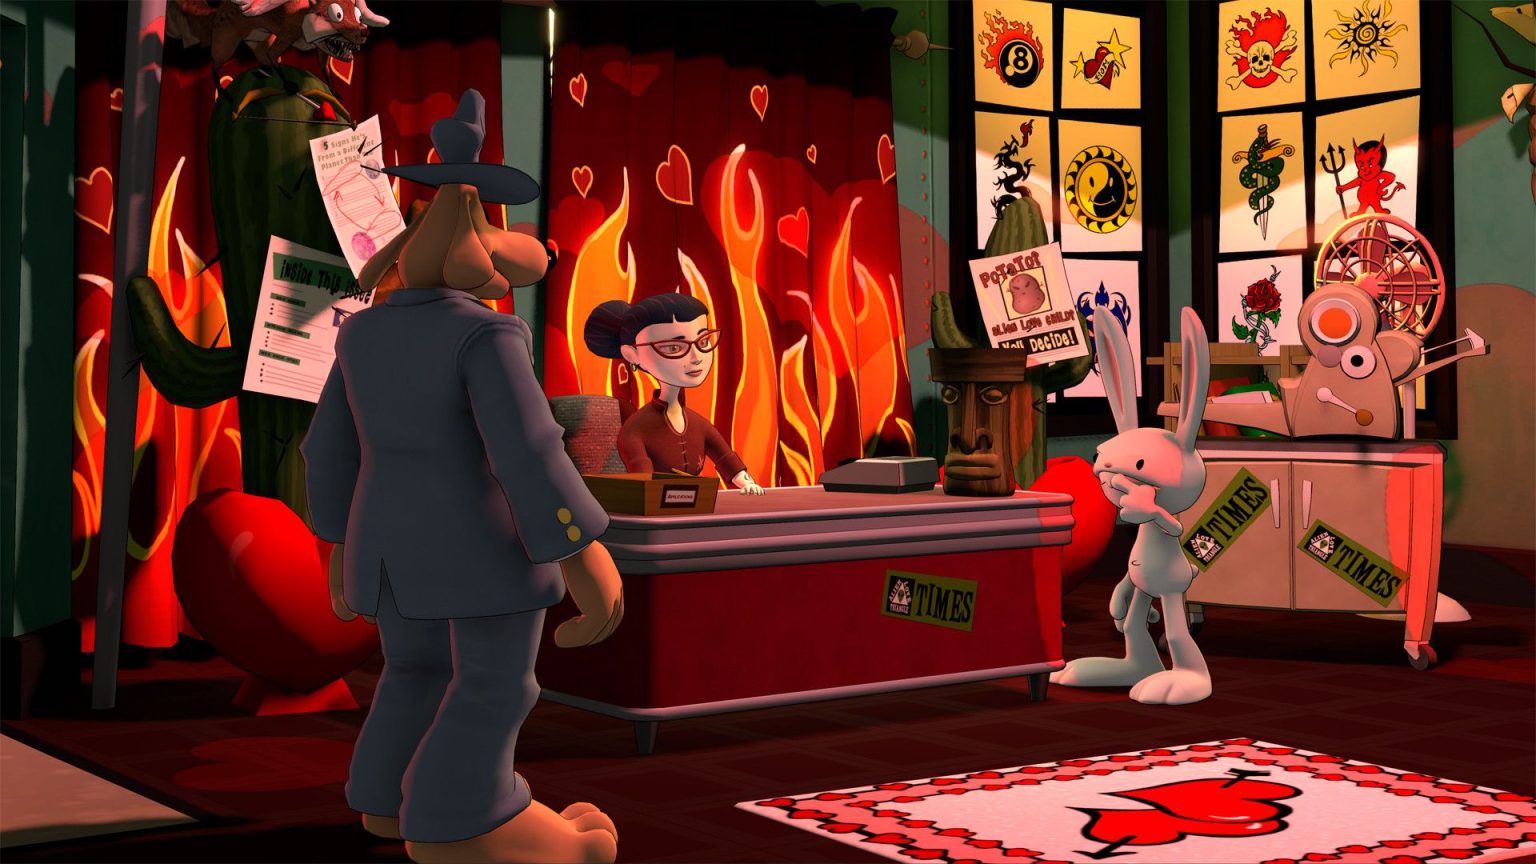 The games coming to PlayStation are Sam & Max Save the World and Sam......